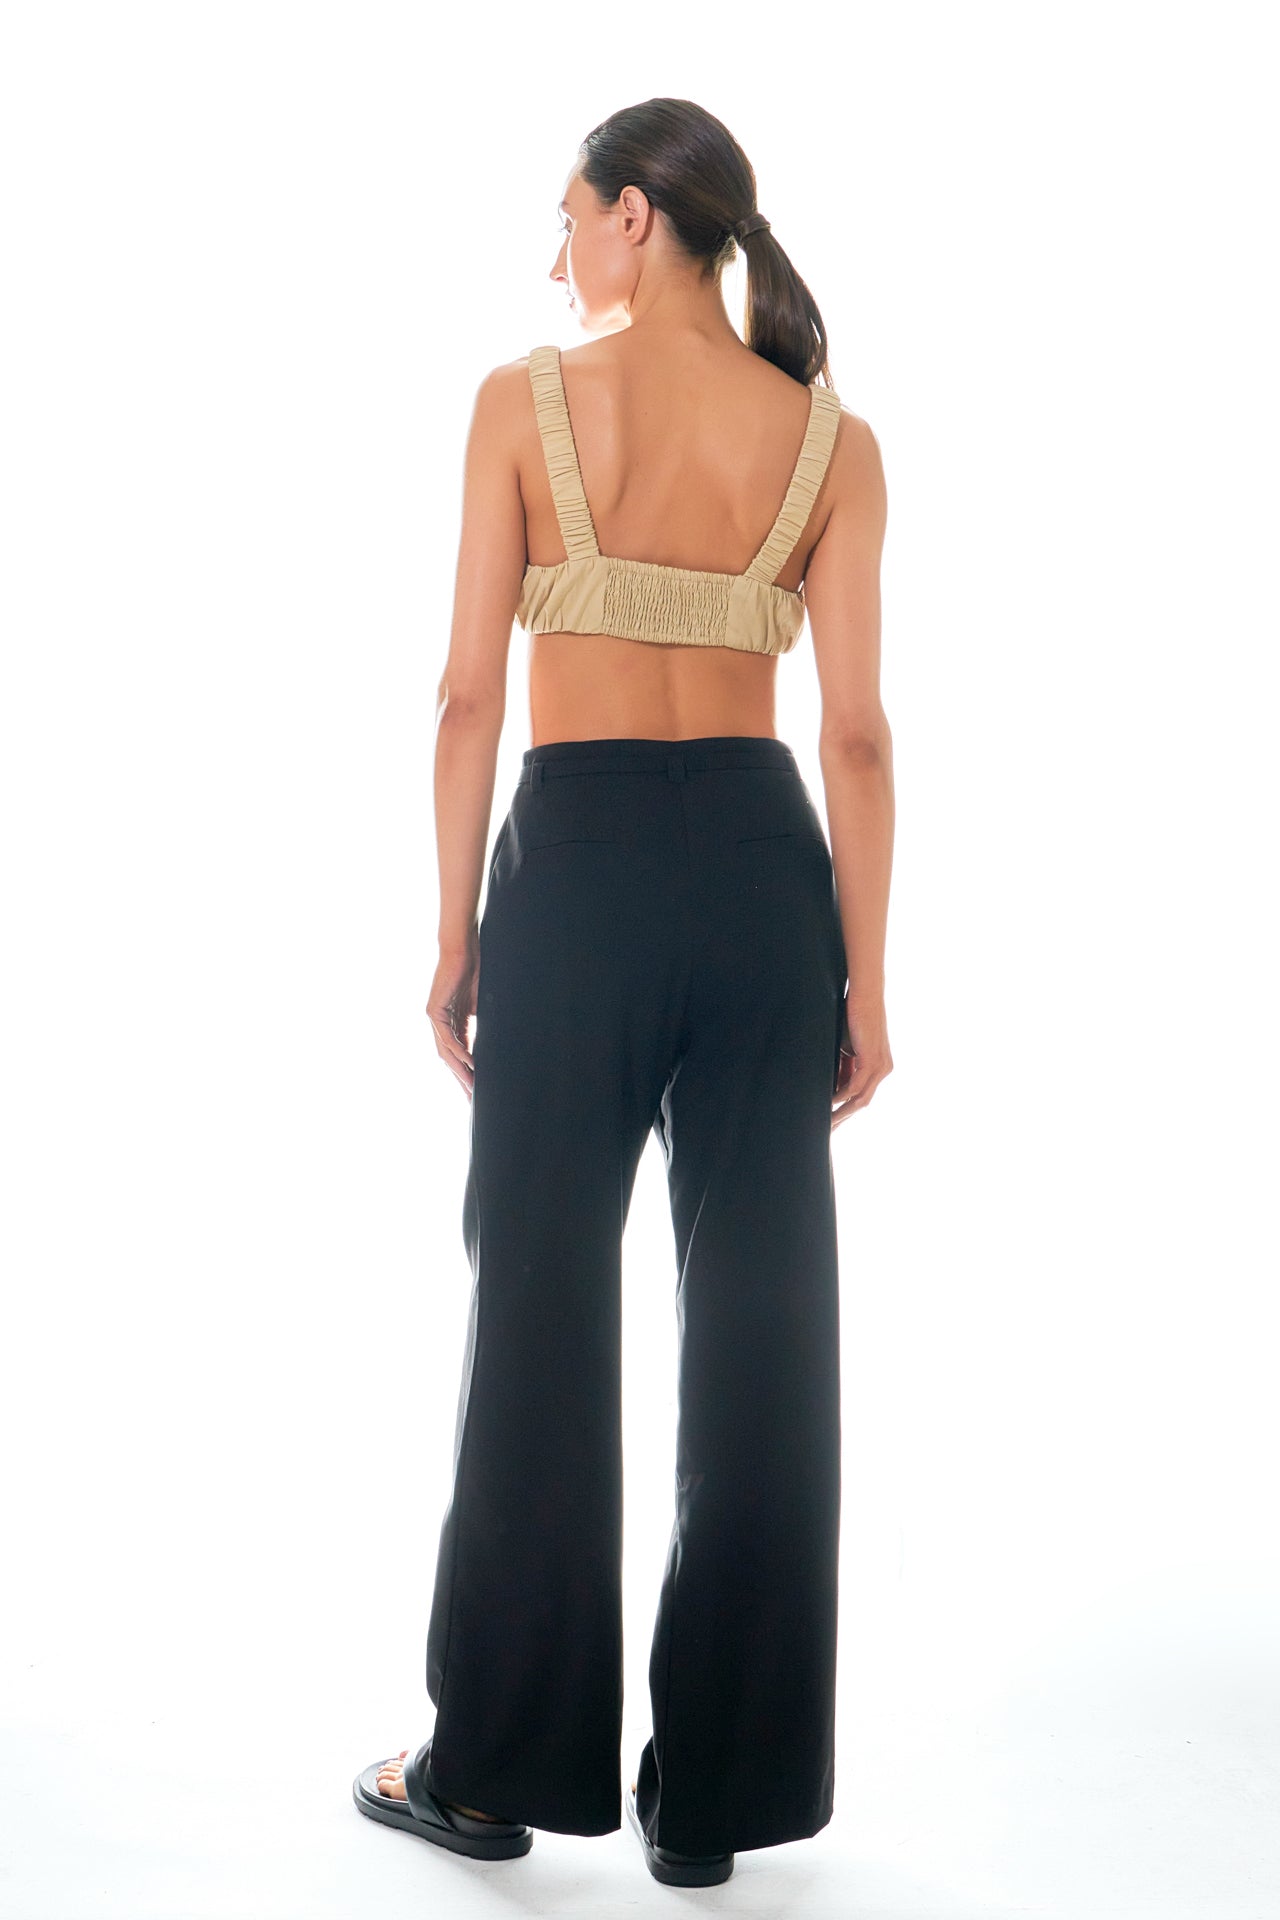 GREY LAB - Scrunchie Bandeau Top - TOPS available at Objectrare